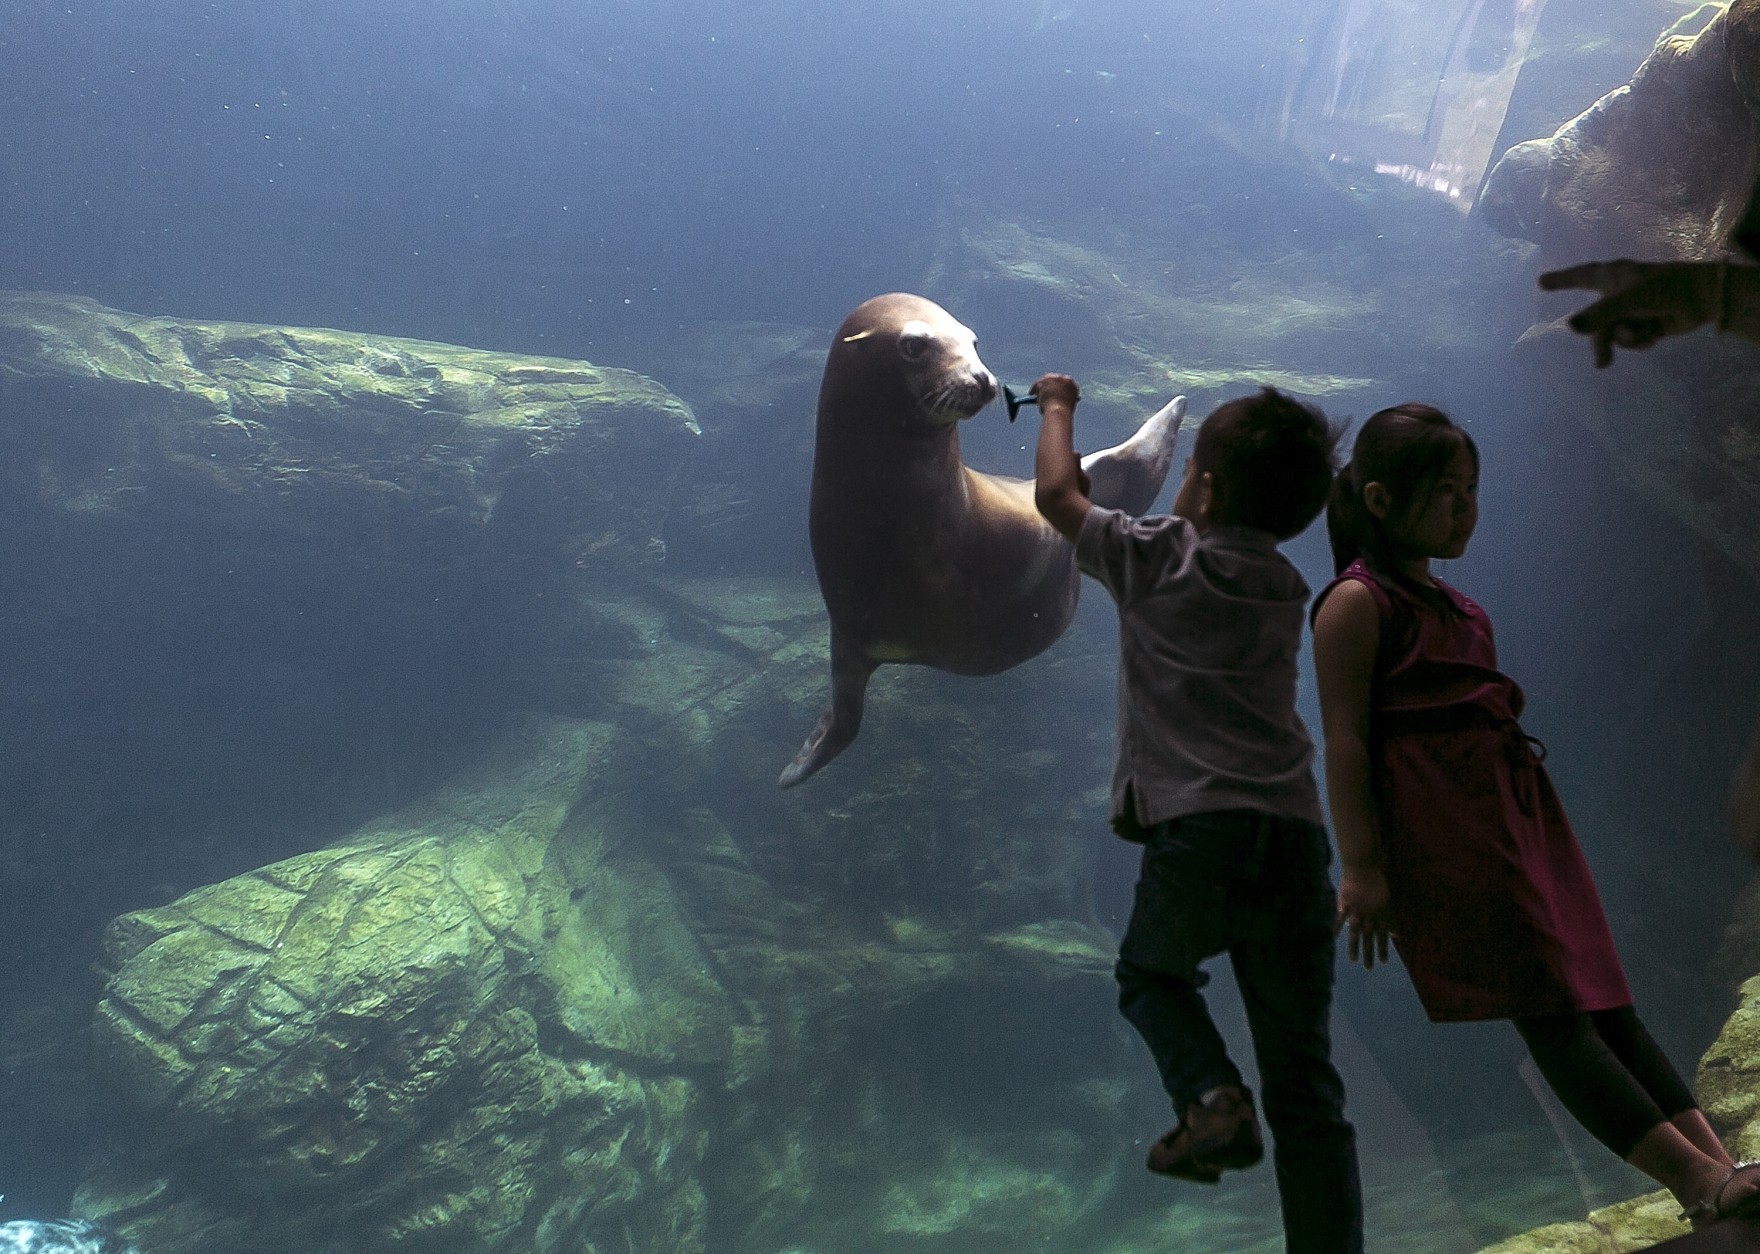 Joseph Han, 5, and sister, Mary Han, from San Jose, Calif., explore the 211,000 gallon Seal and Sea Lion Habitat at the Aquarium of the Pacific in Long Beach, Calif., Wednesday, Aug. 14, 2013. (AP Photo/Damian Dovarganes)